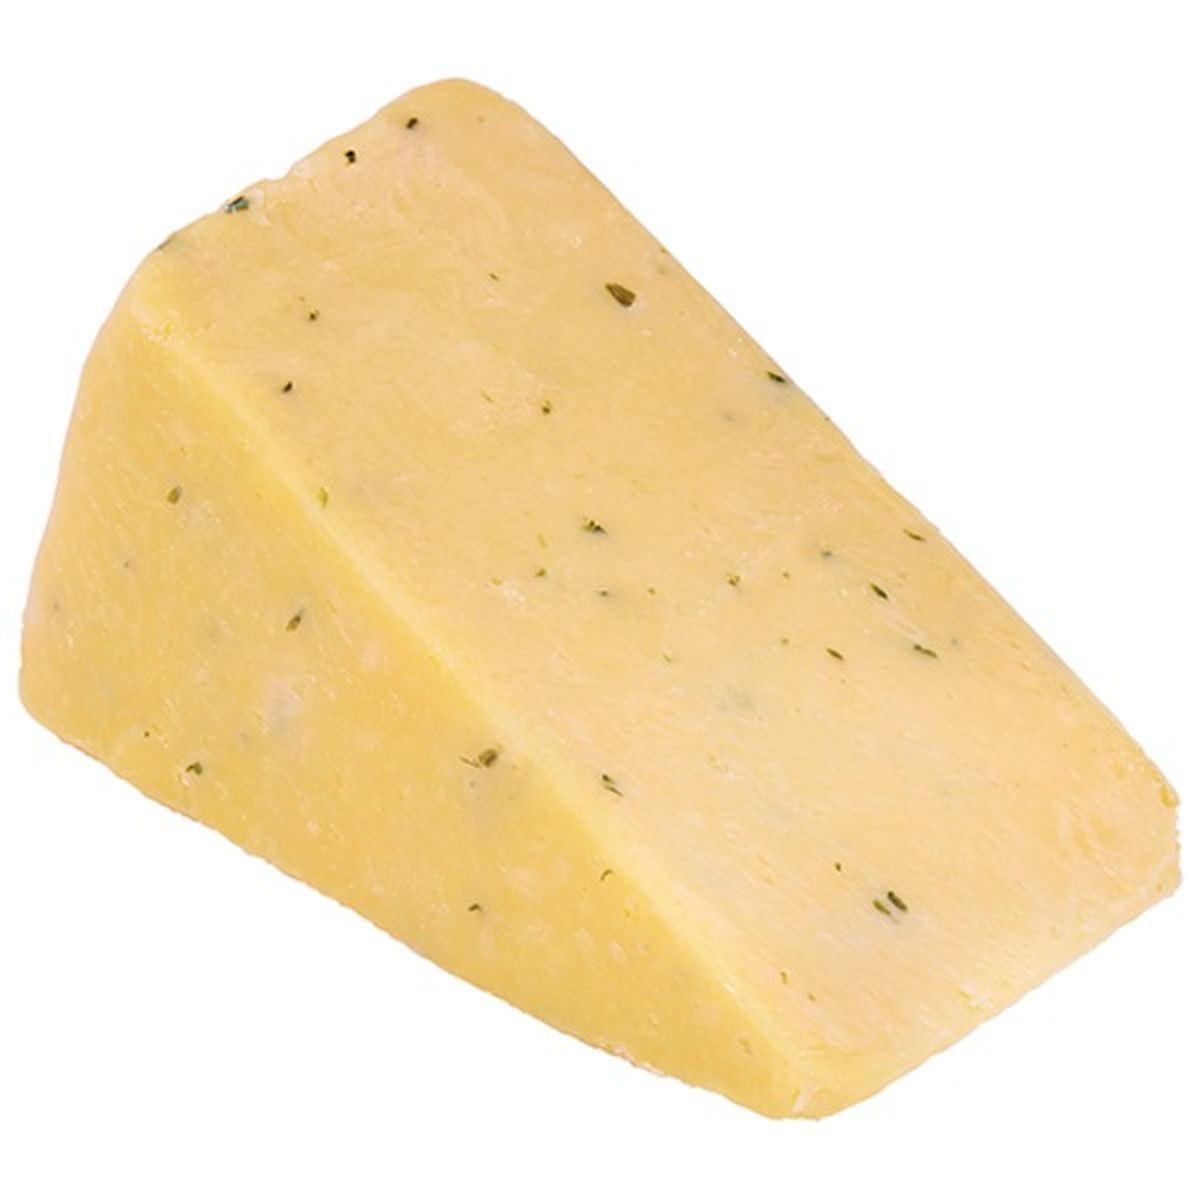 Calories in Cooper's  Hill Cheddar